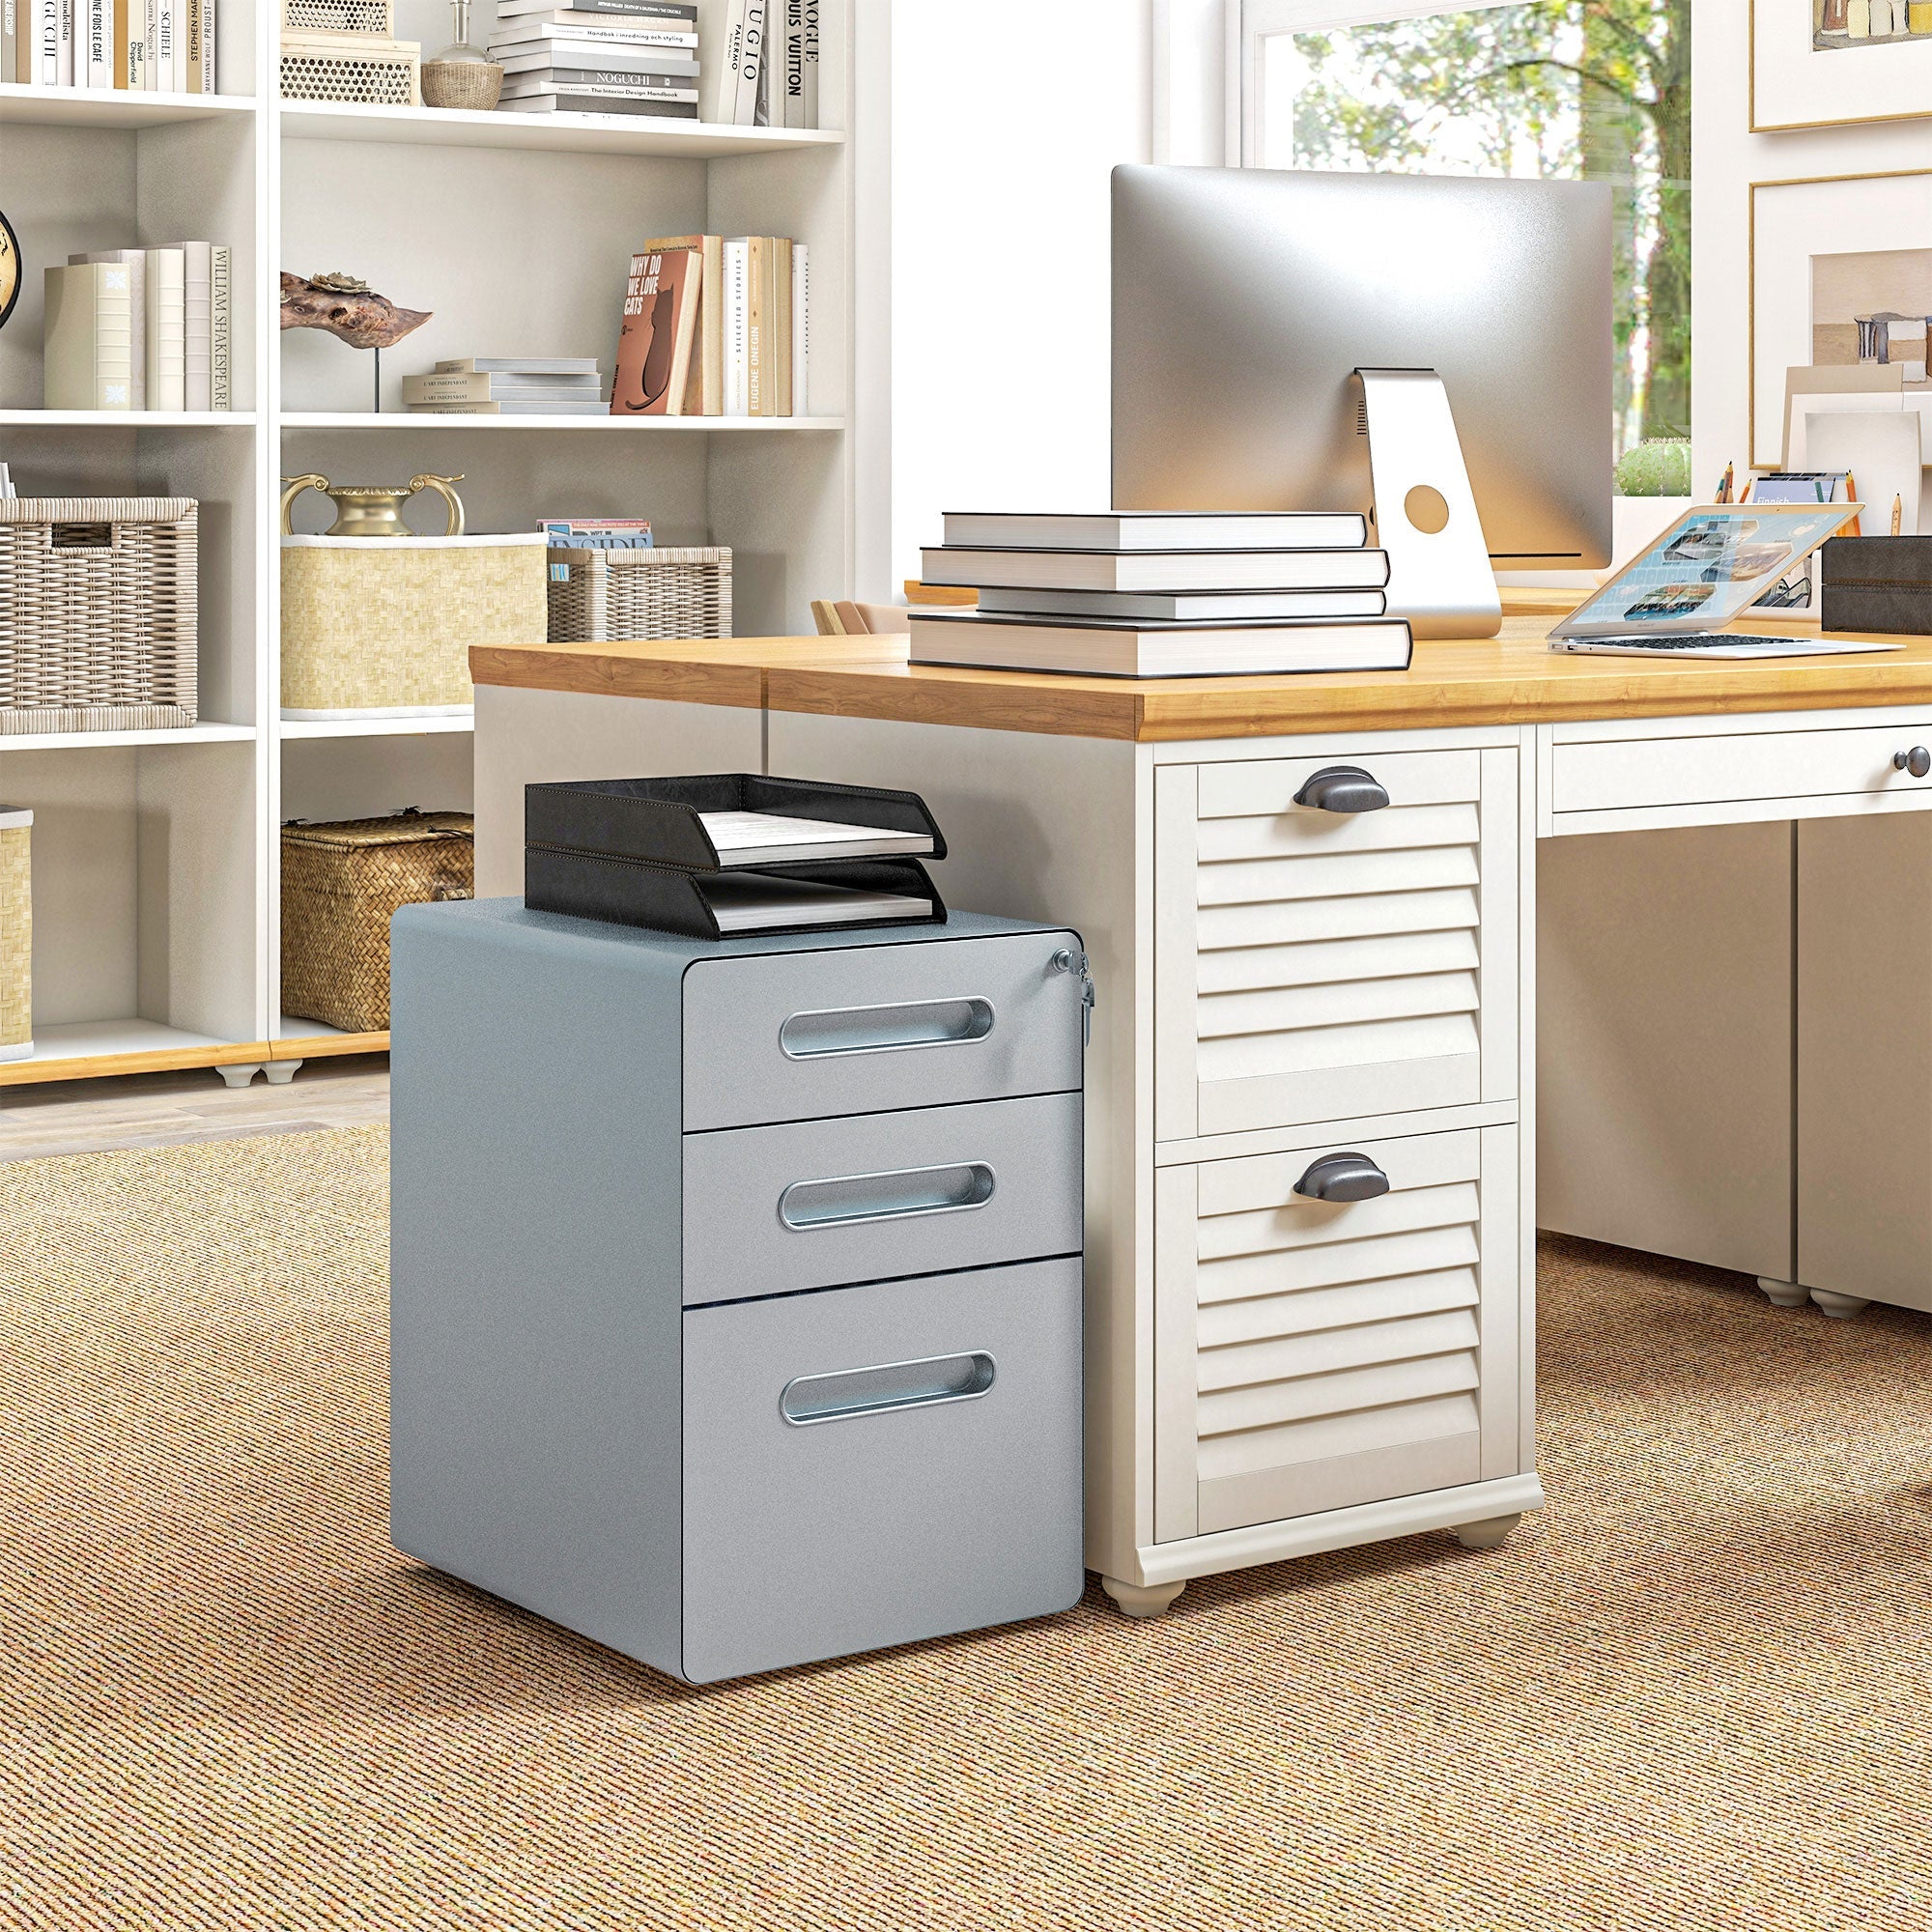 Lockable Cabinet, Rolling Filing Cabinet with 3 Drawers, Steel Office Drawer Unit for A4, Letter, Legal Sized Files-1